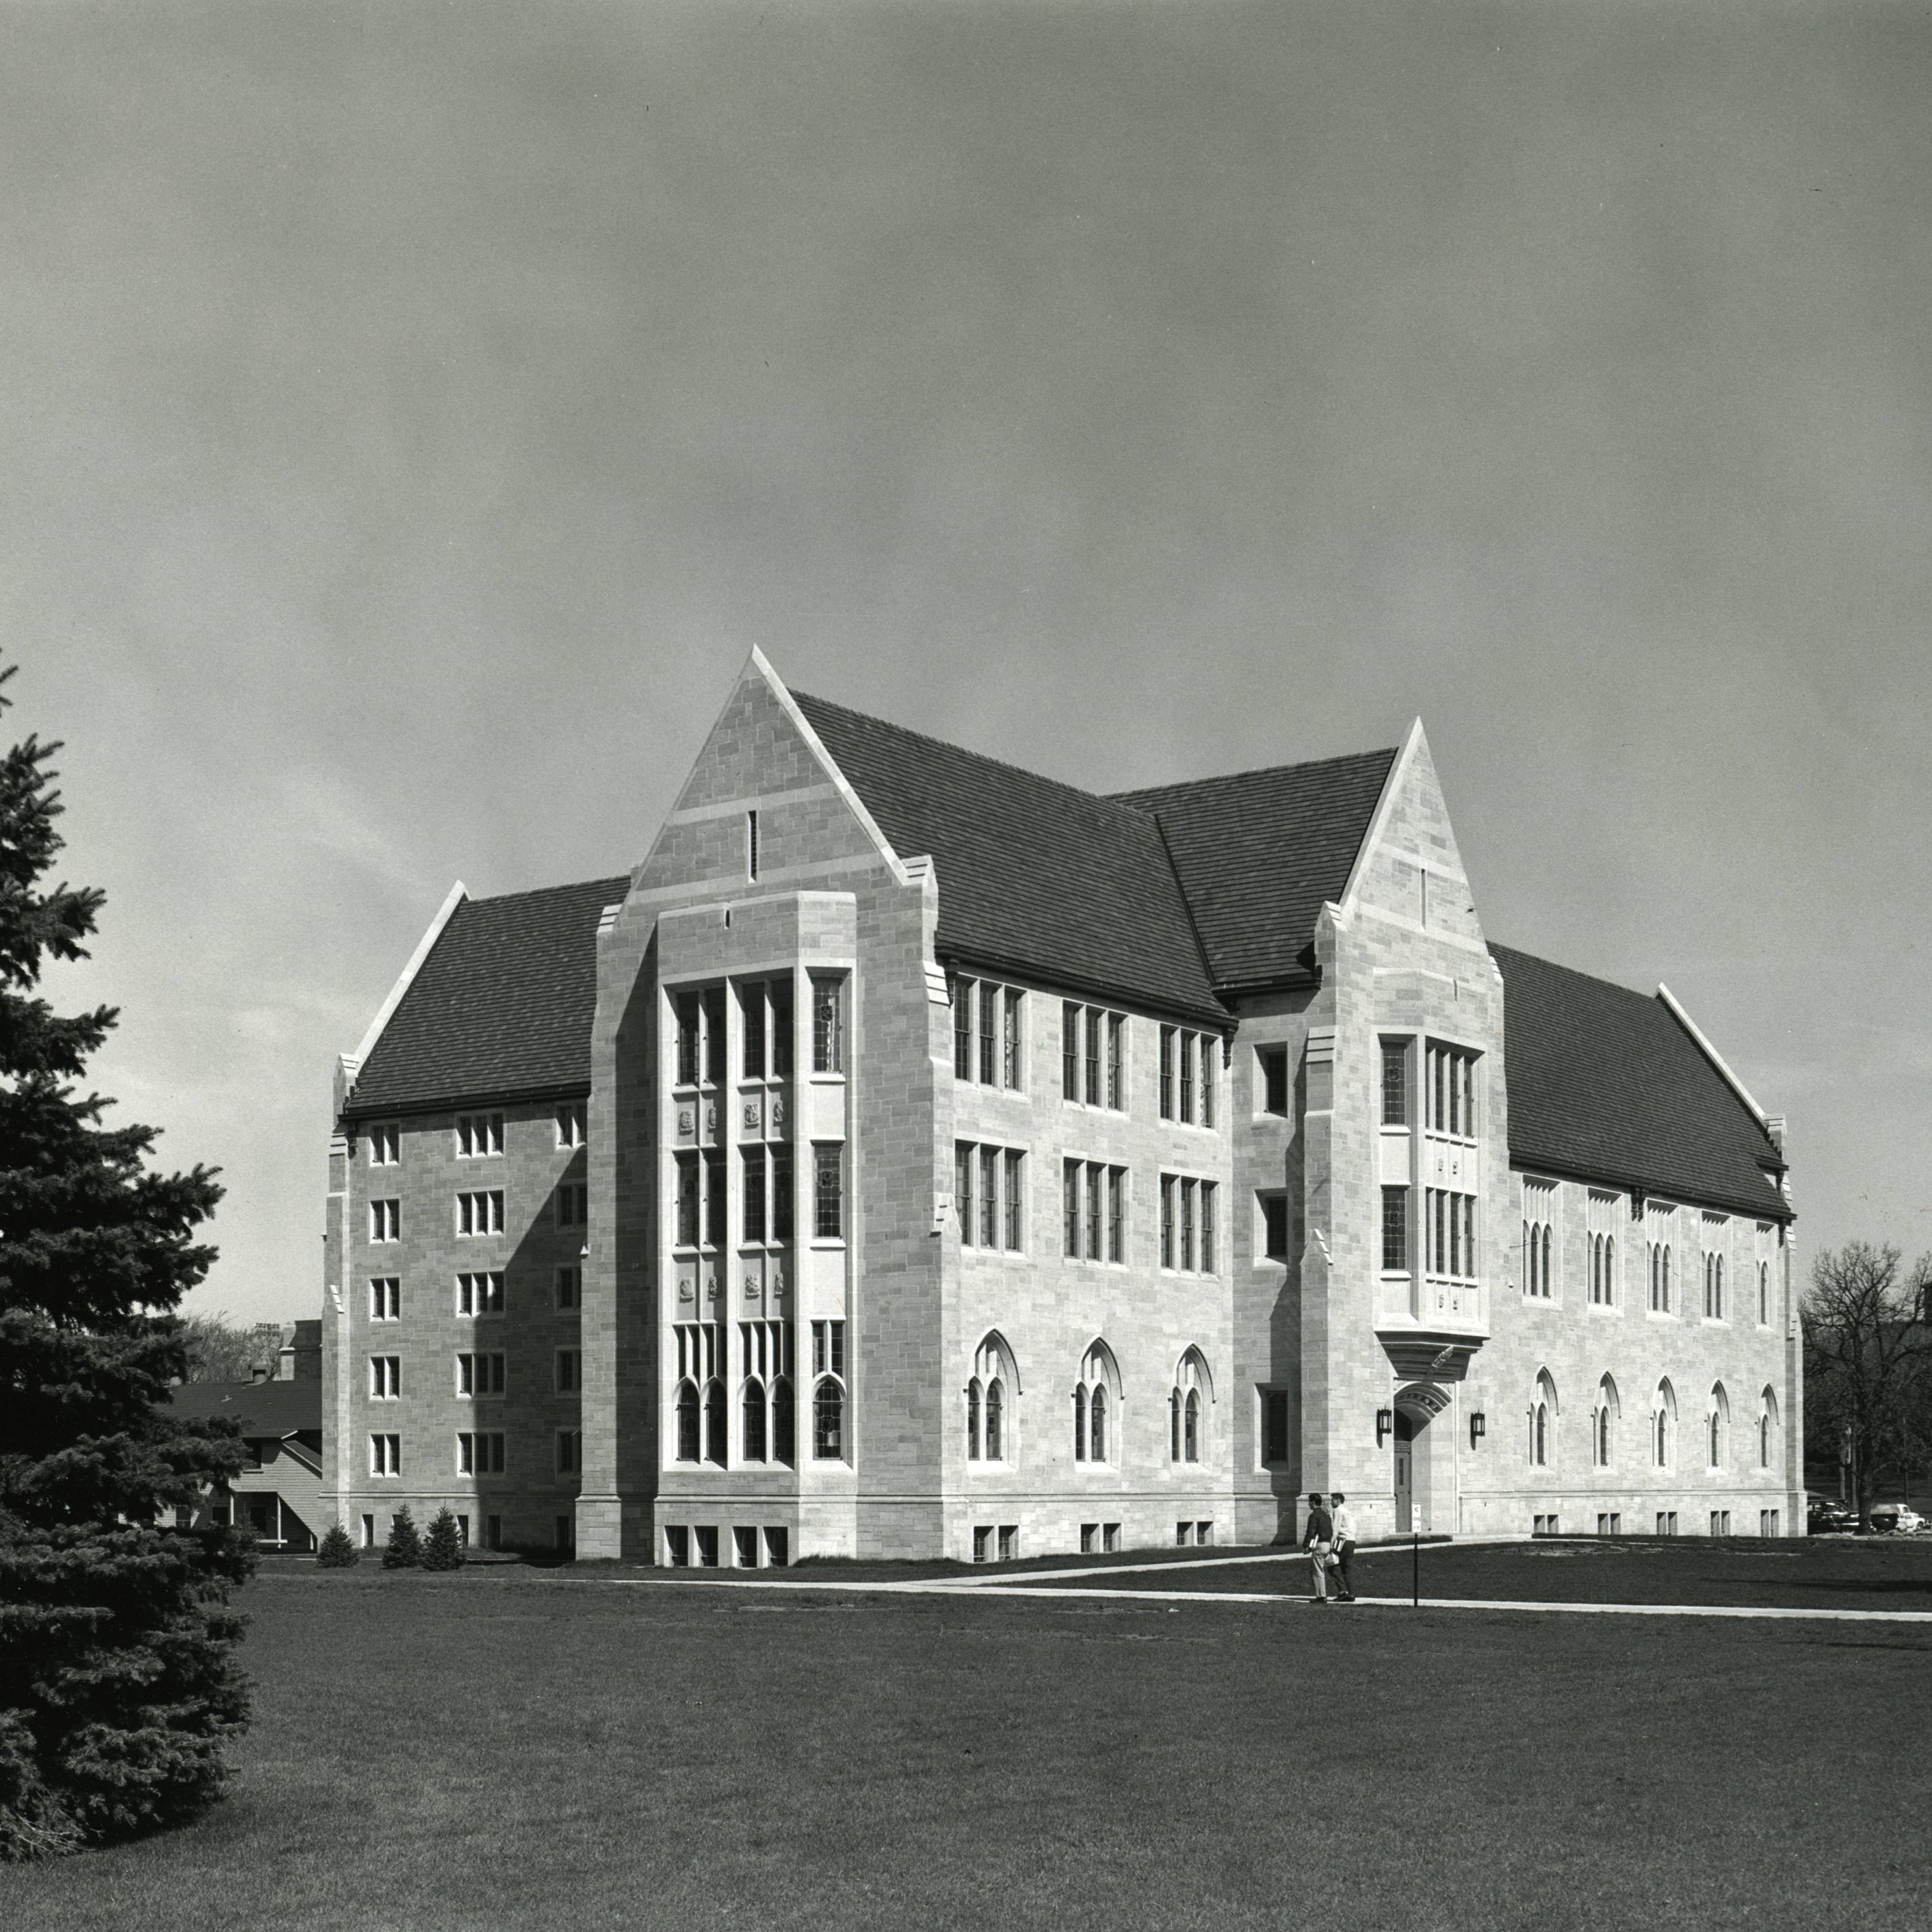 Archival photo of the exterior of O’Shaughnessy Library